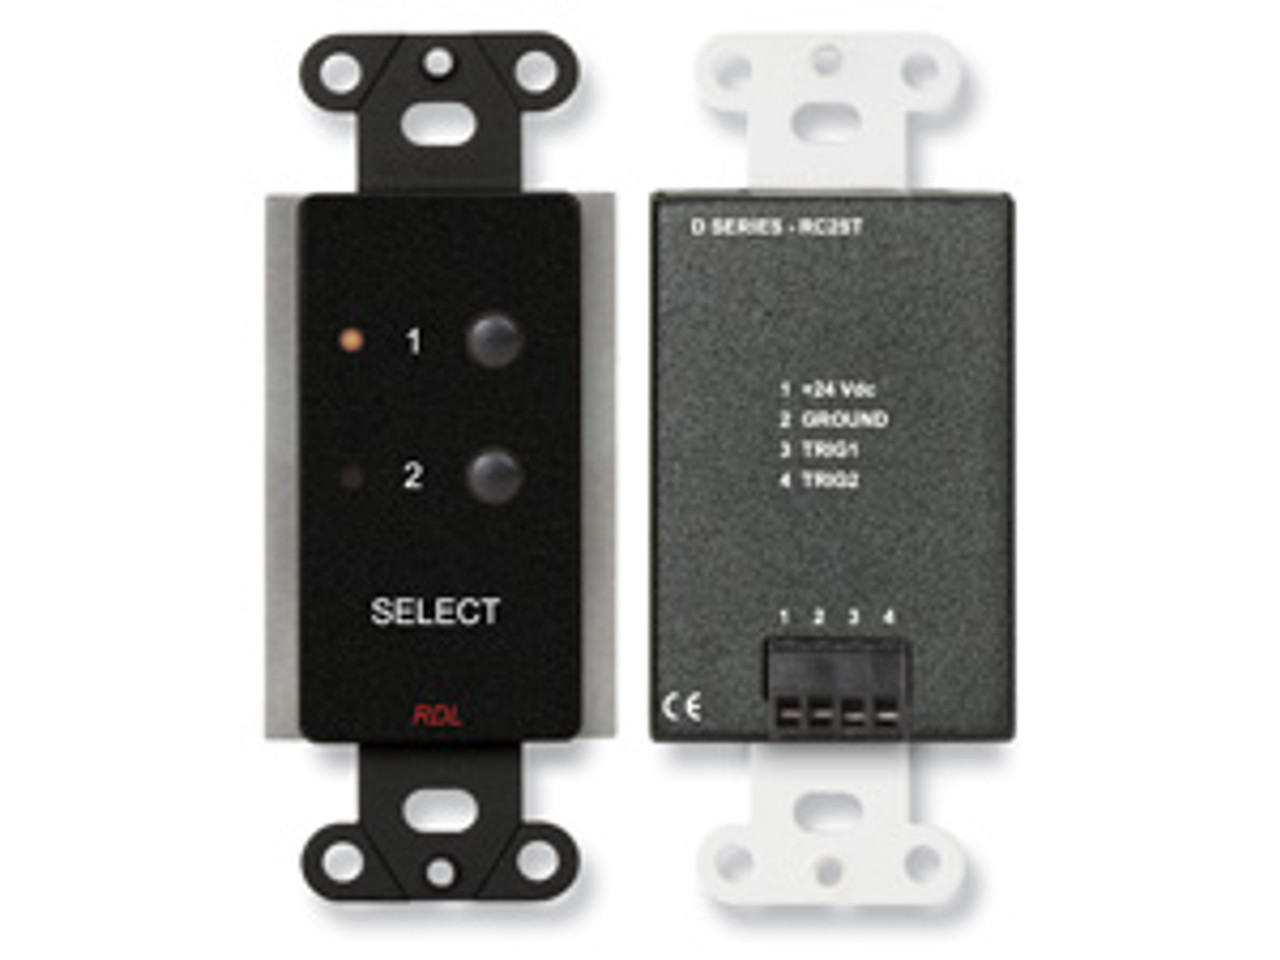 RDL D-RC2ST 2 Channel Remote Control for STICK-ON - Remote Selection of Audio or Video Sources (DRC2ST)